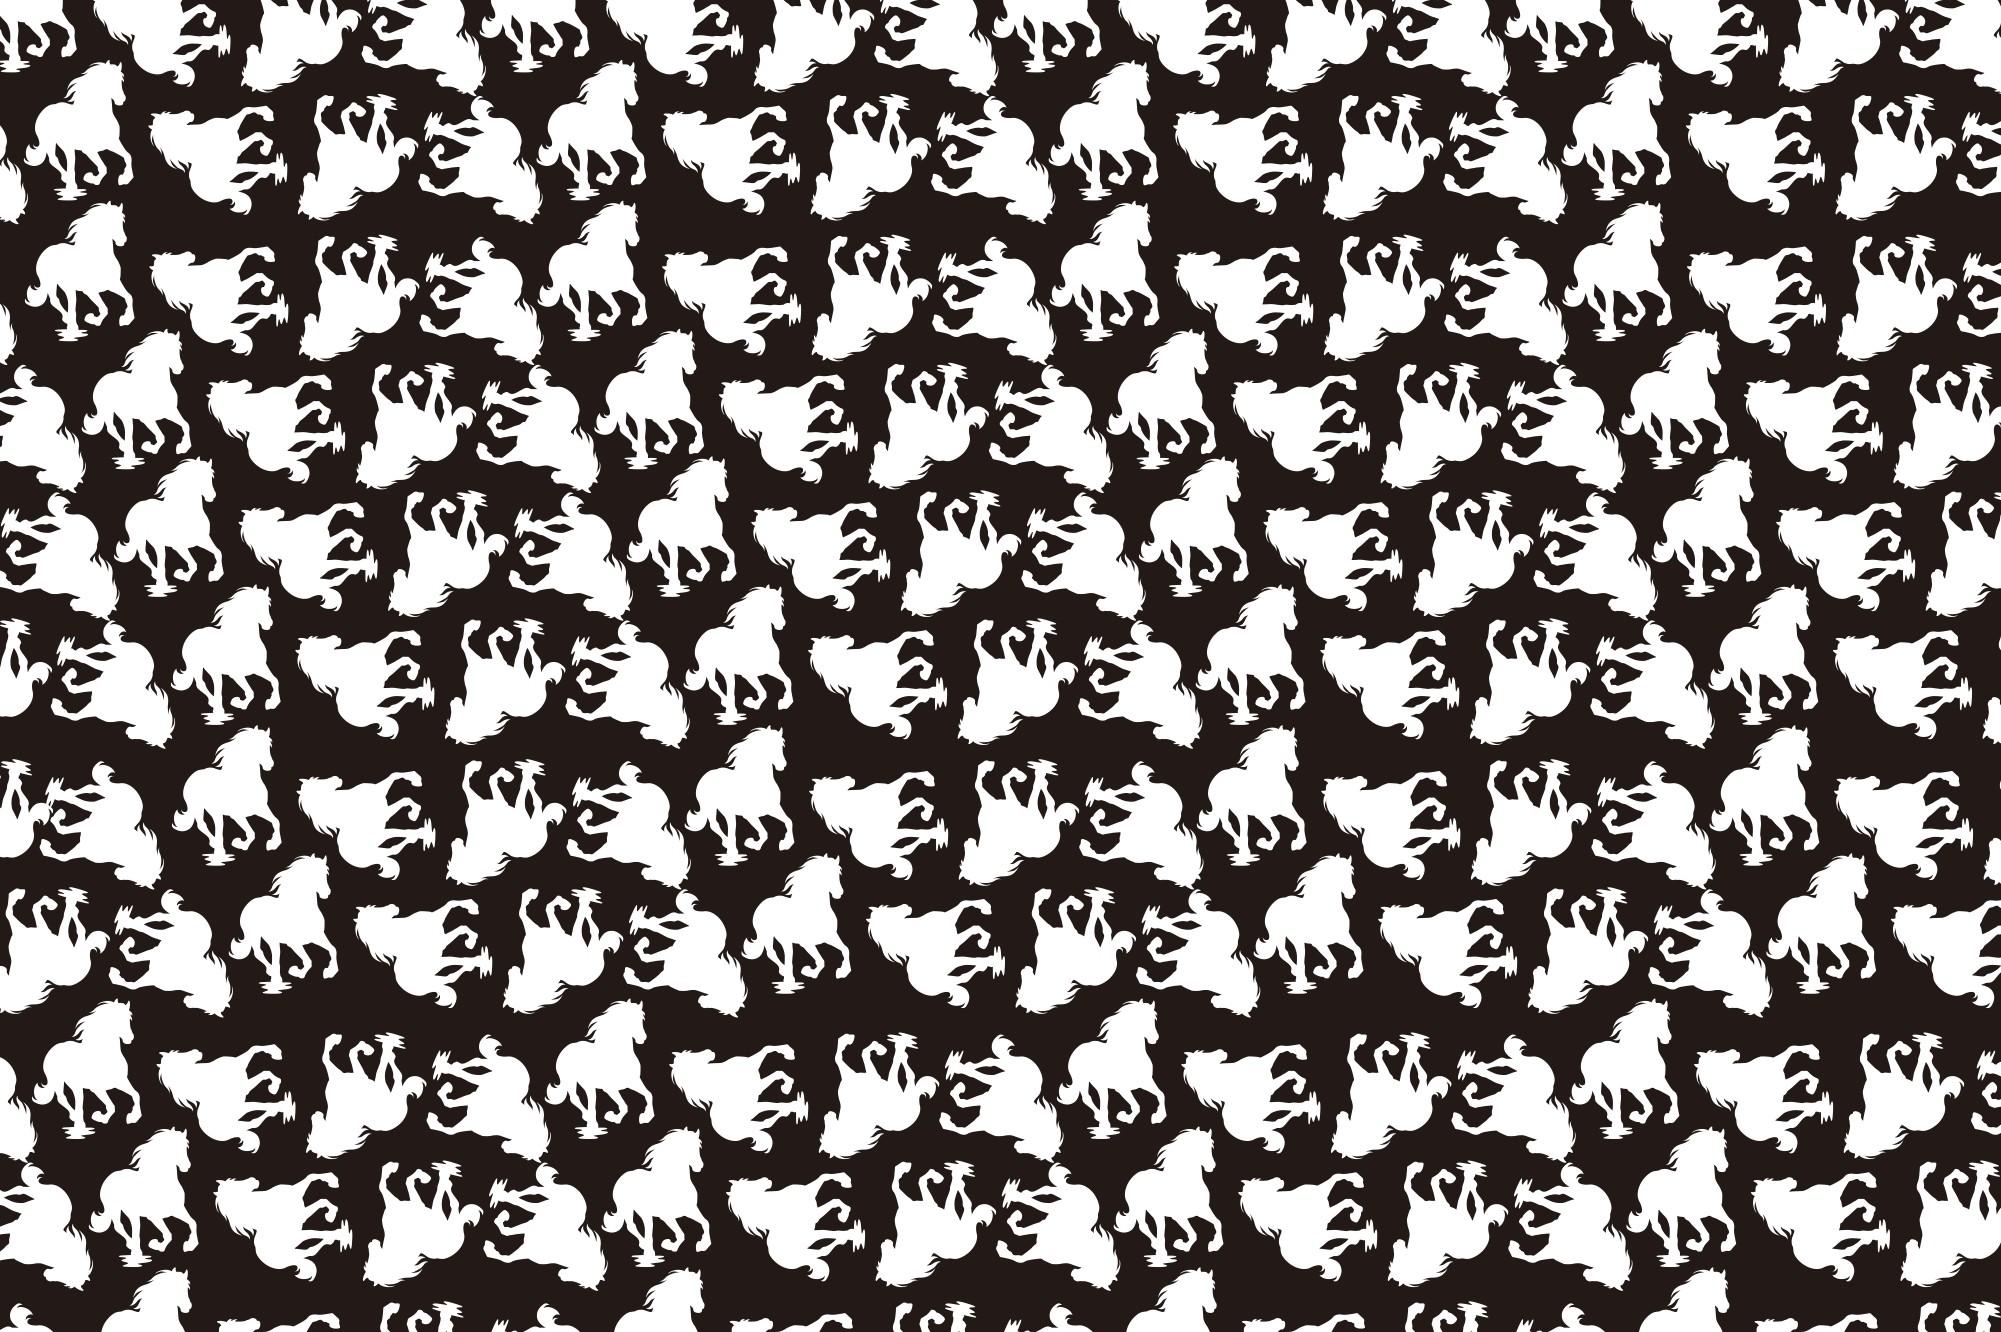 Horse Silhouette Pattern